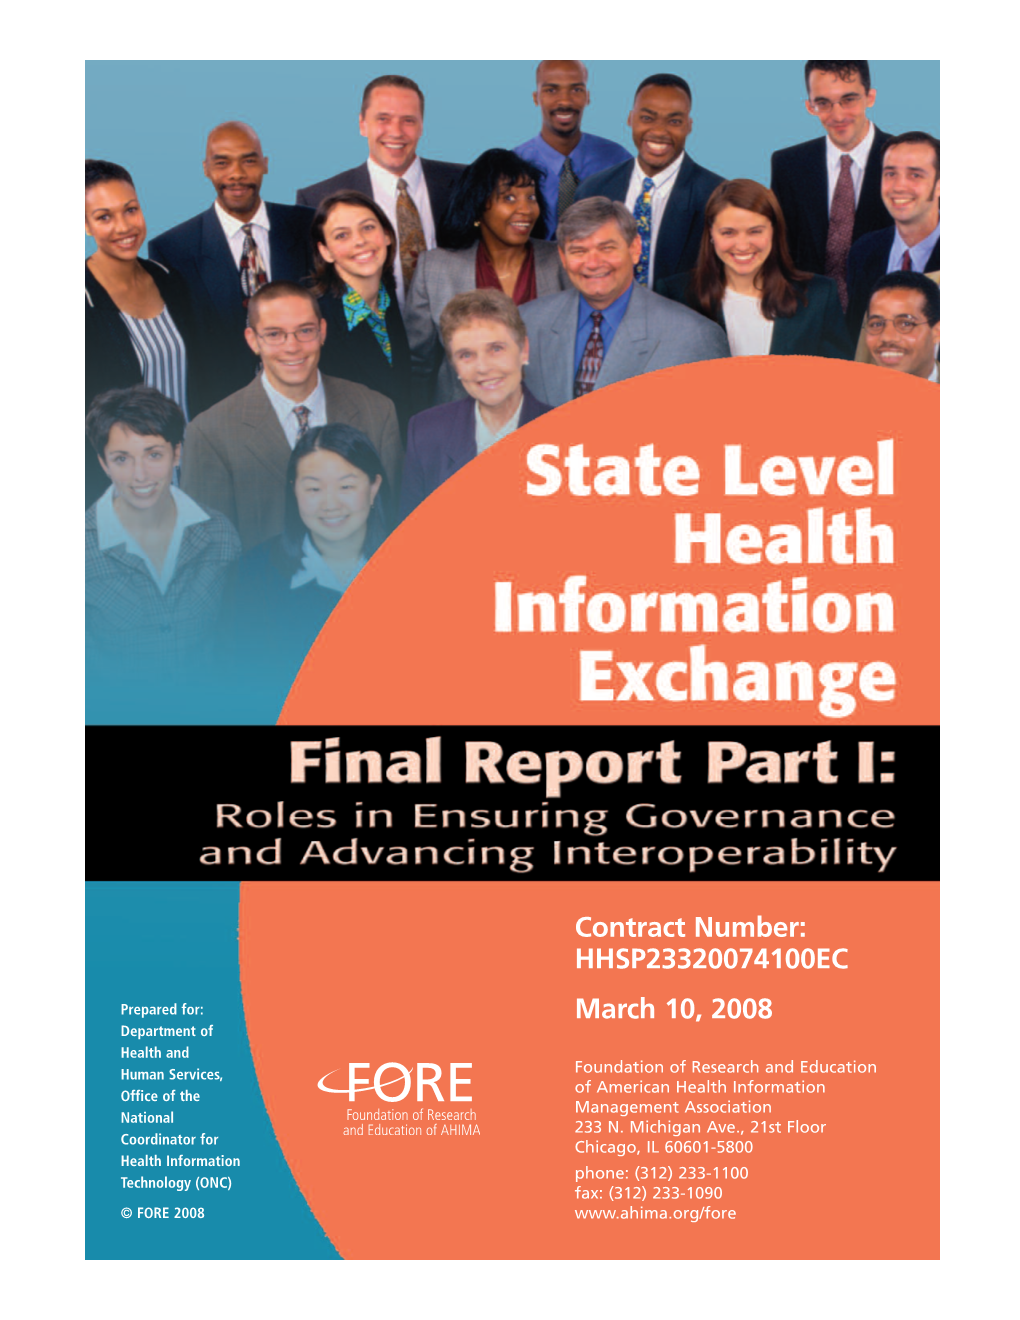 State Level Health Information Exchange. Final Report Part I